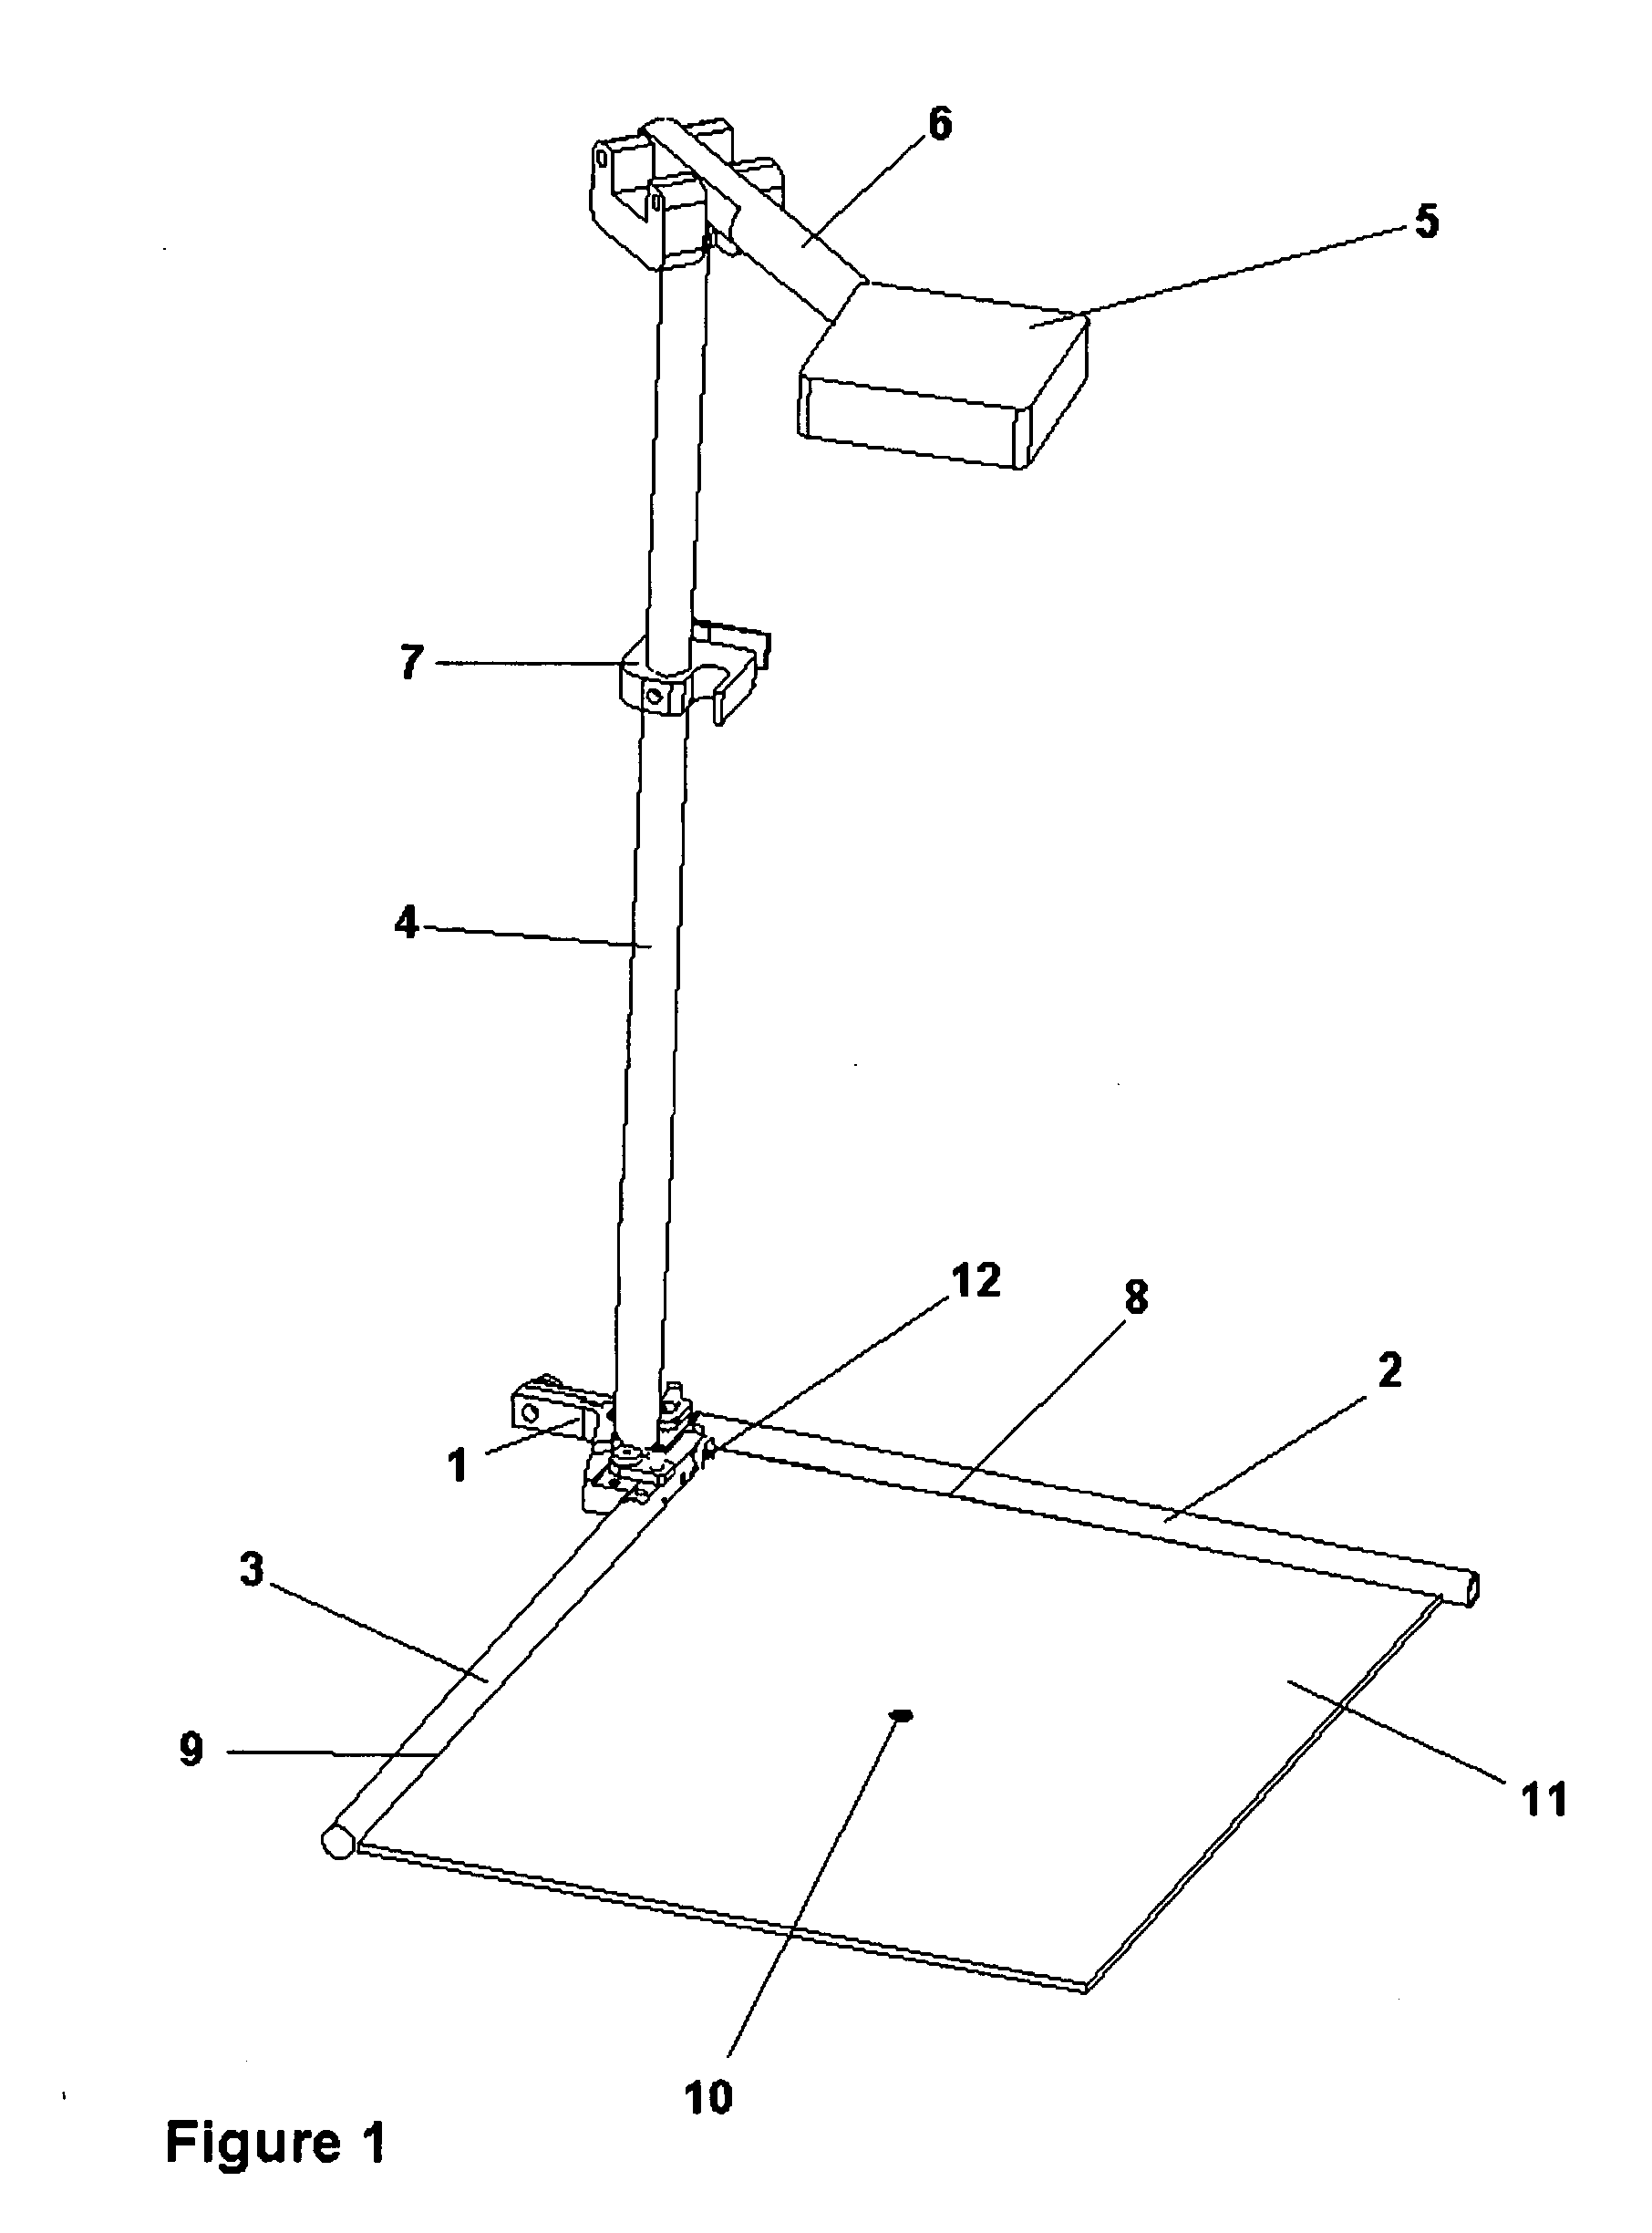 Electronic magnification device